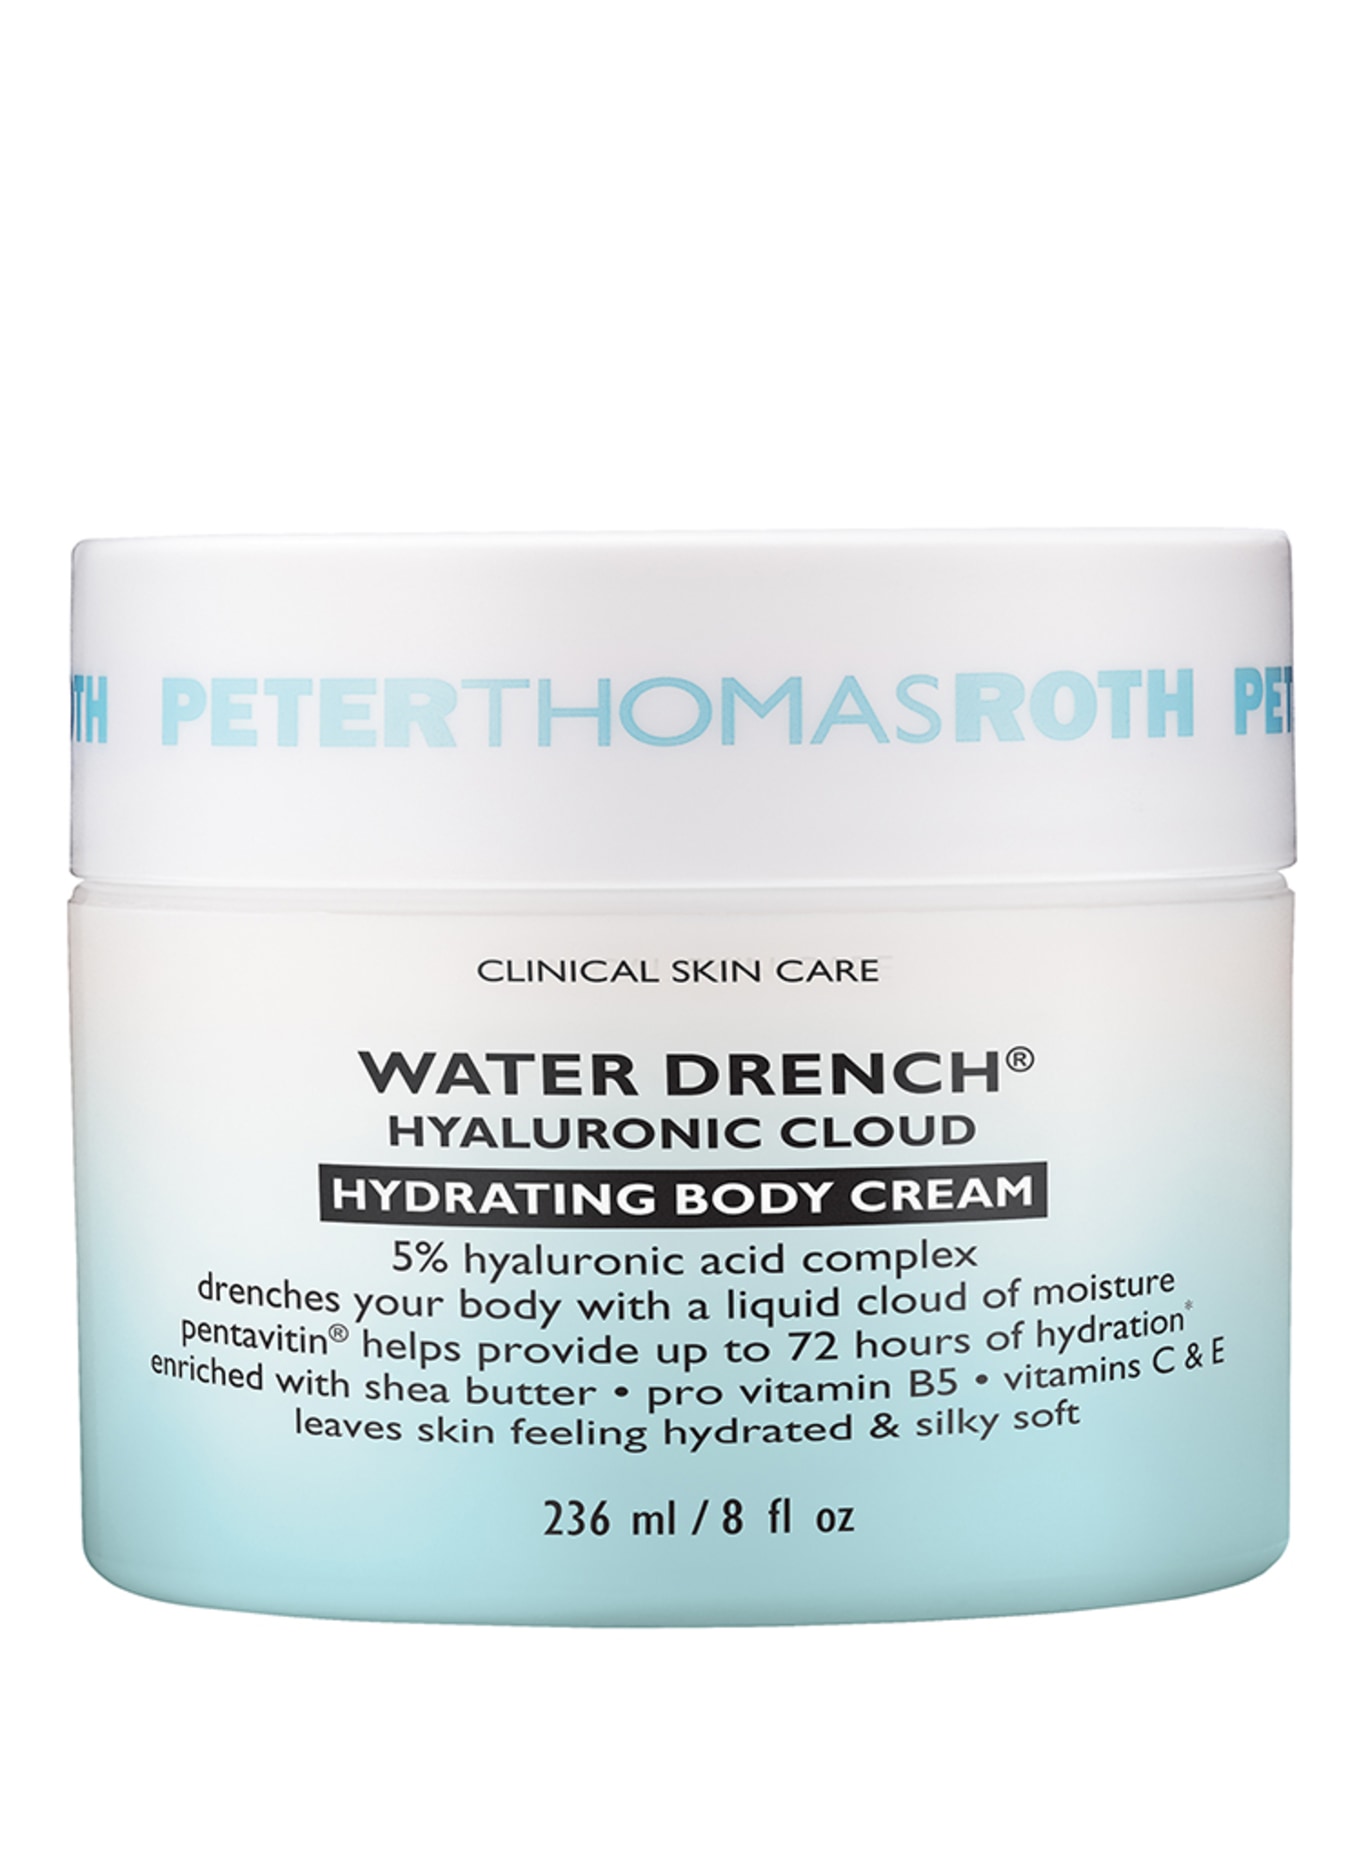 PETER THOMAS ROTH WATER DRENCH® HYALURONIC CLOUD (Bild 1)